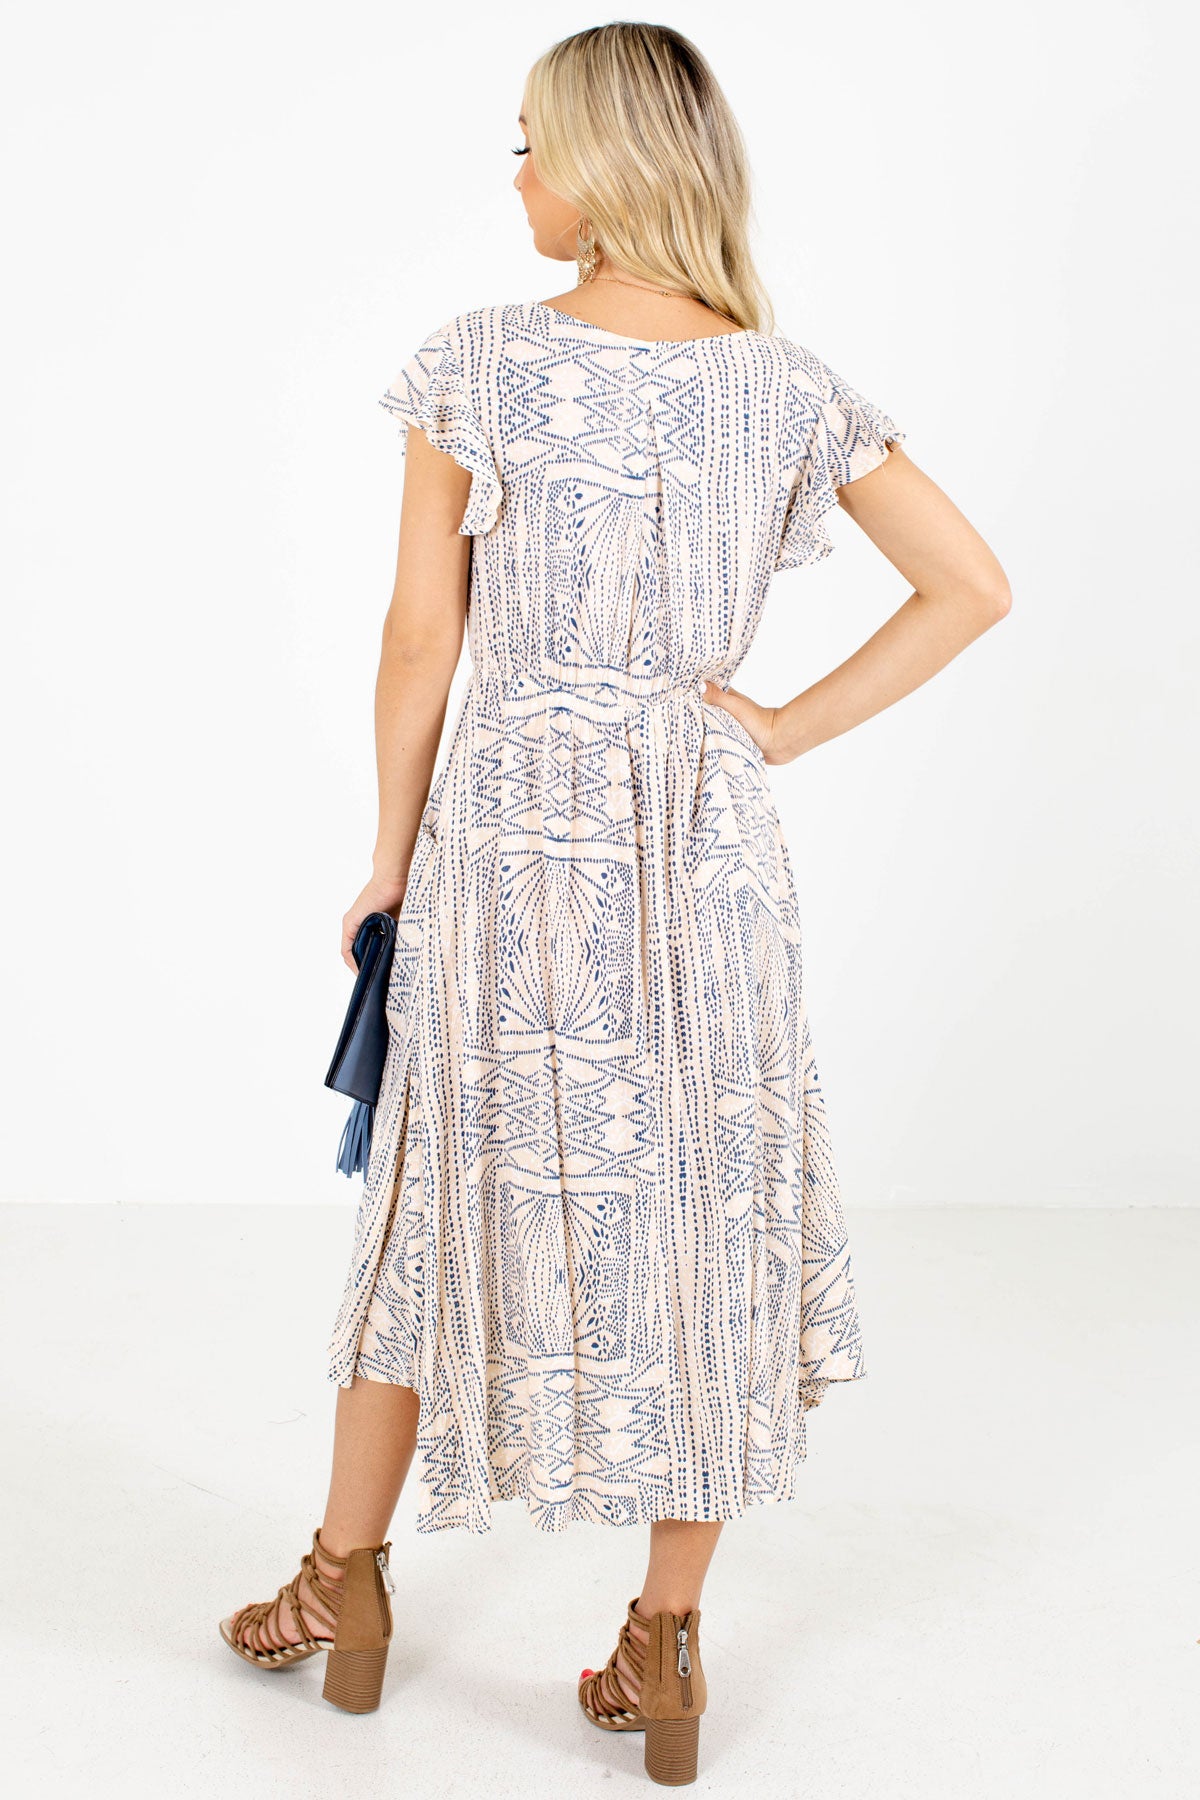 Patterned midi dress in blue and tan for women